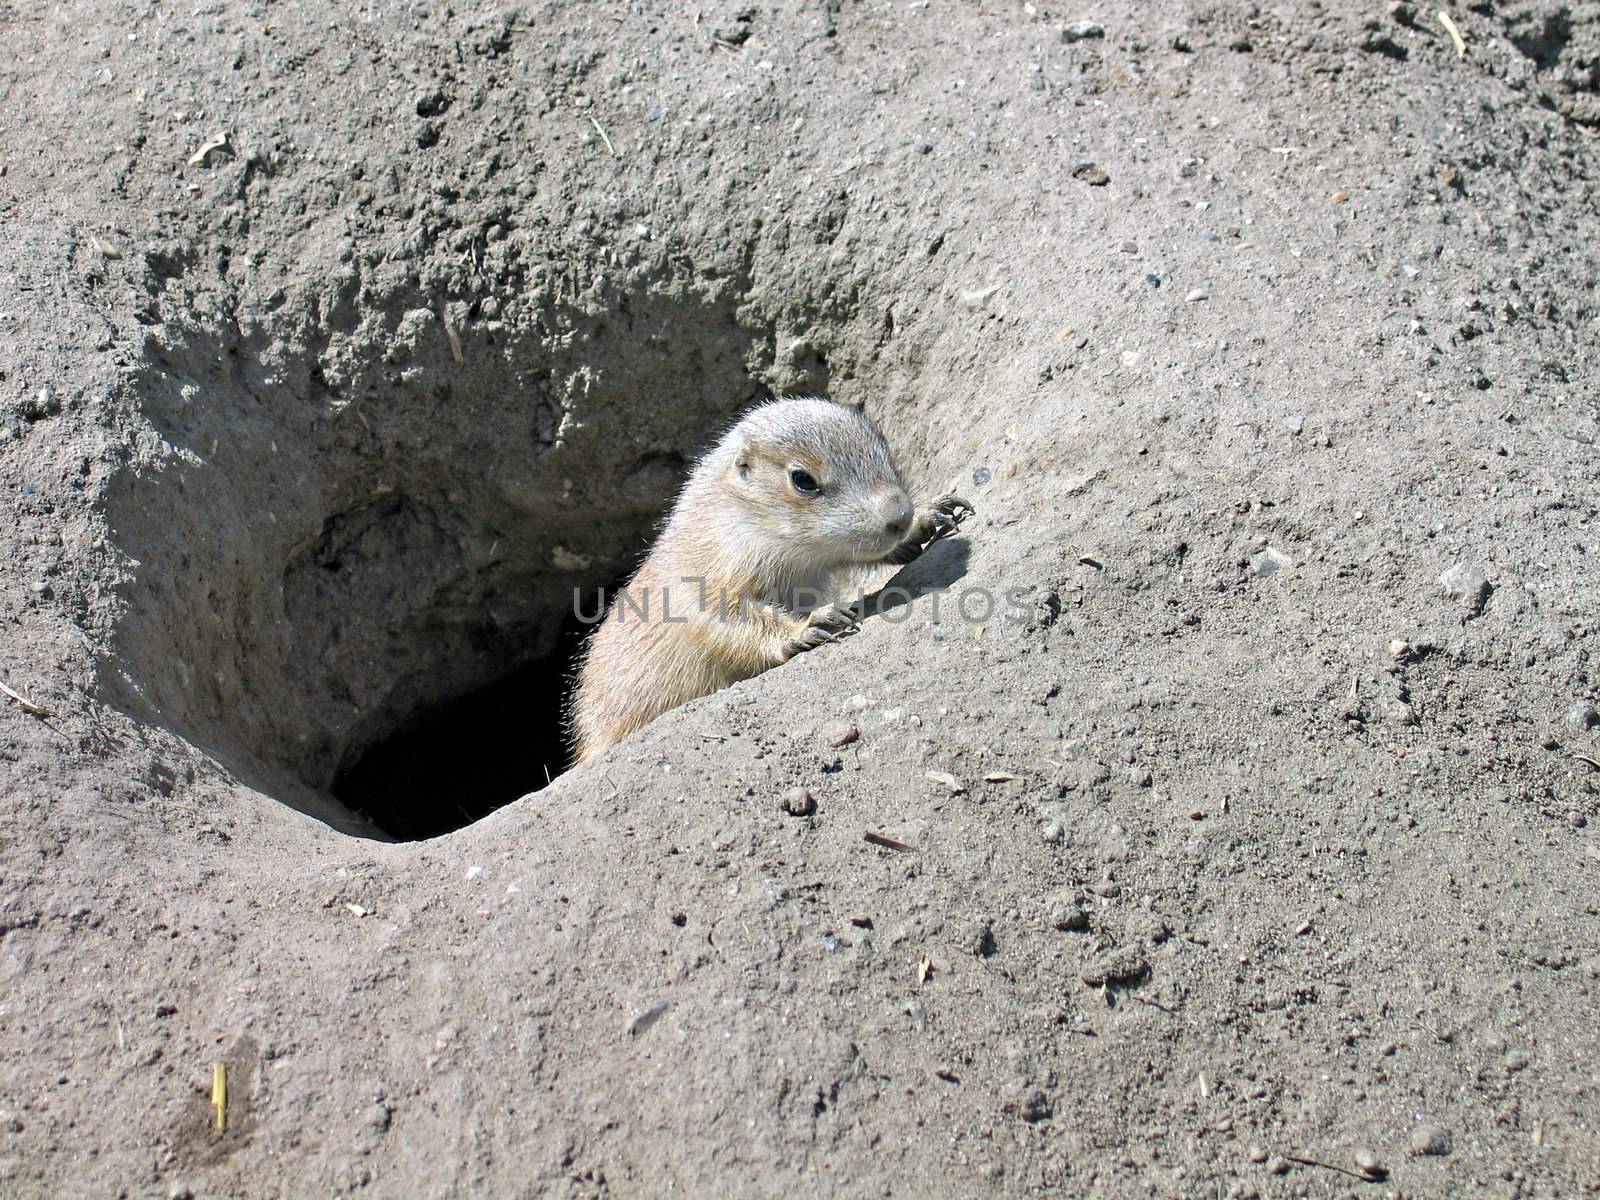 Prairie dog emerging from his tunnel